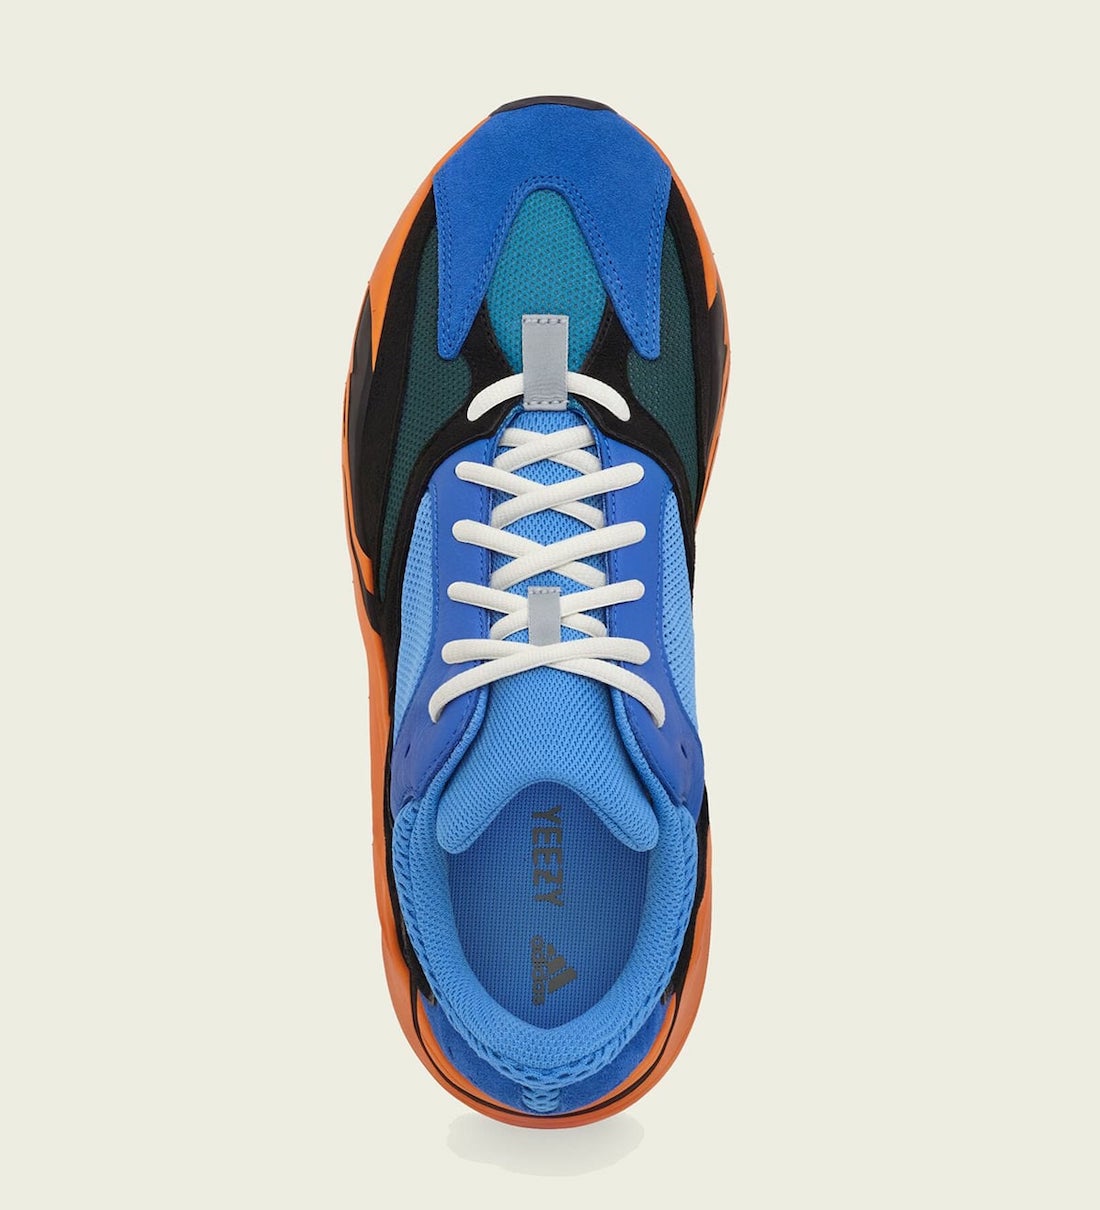 adidas Yeezy Boost 700 Bright Blue GZ0541 Release Date 2